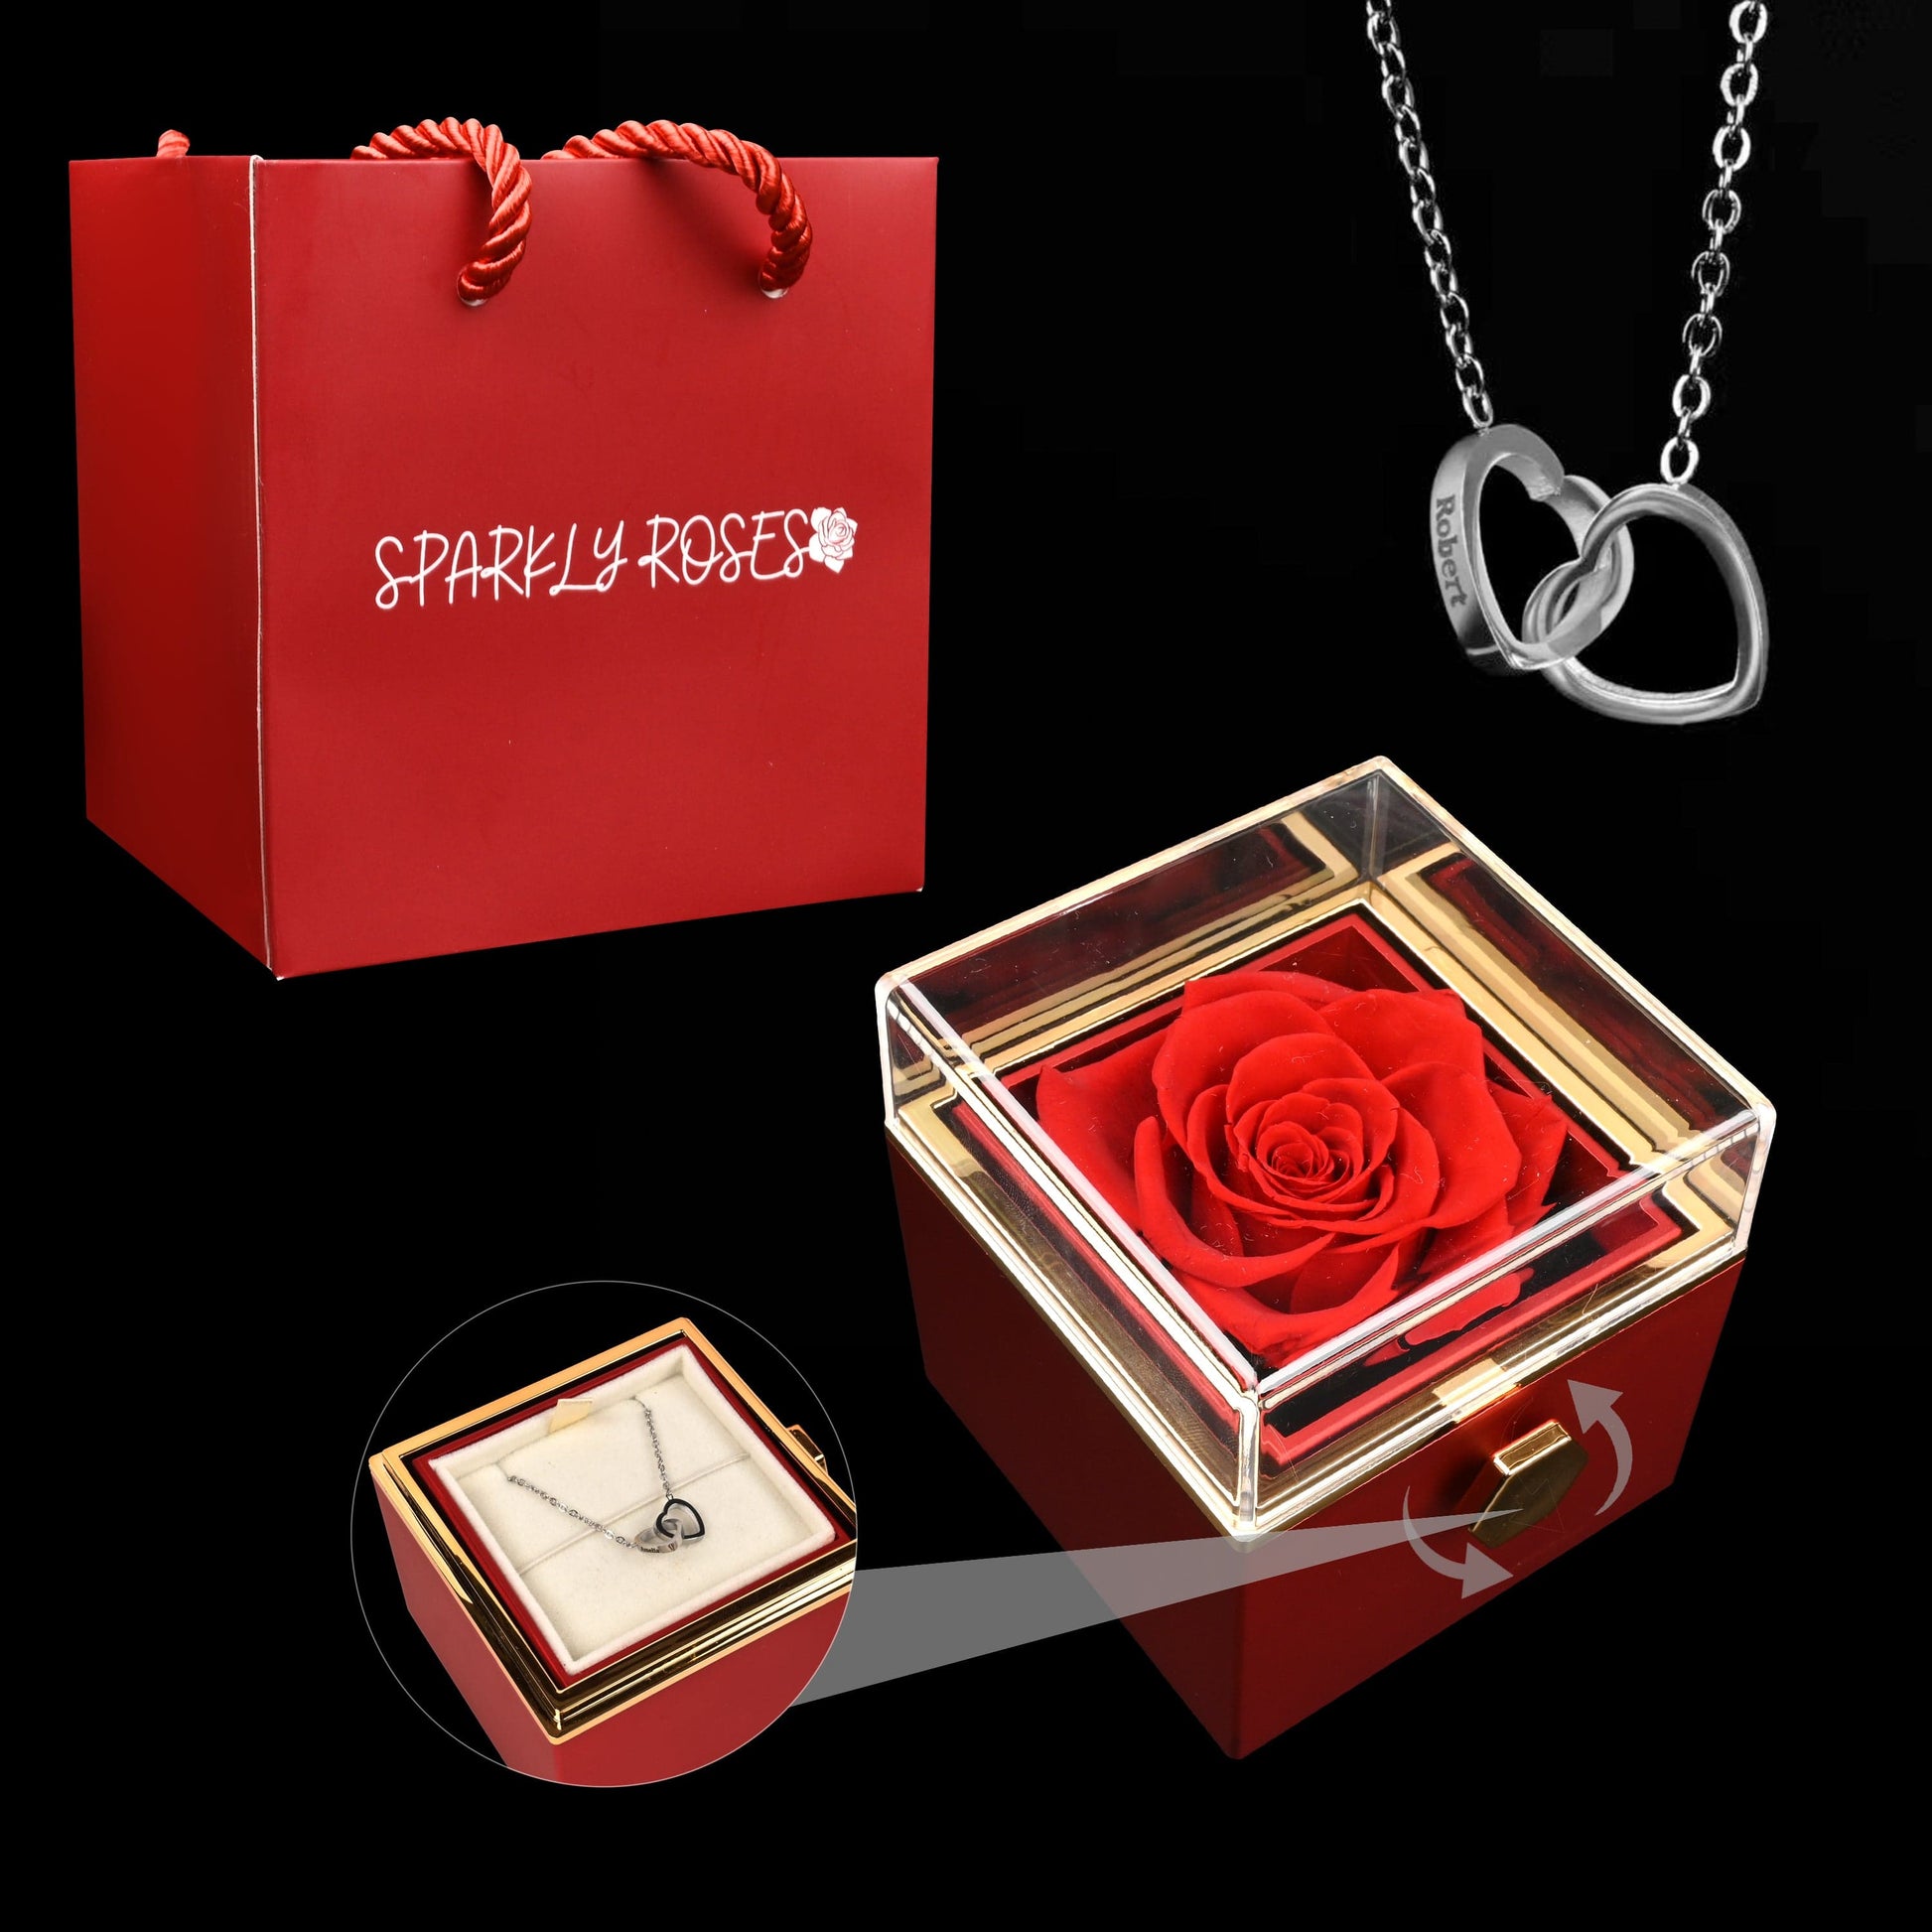 Sparkly Roses Eternal Rose Box - W/ Engraved Necklace & Real Rose Red / Silver